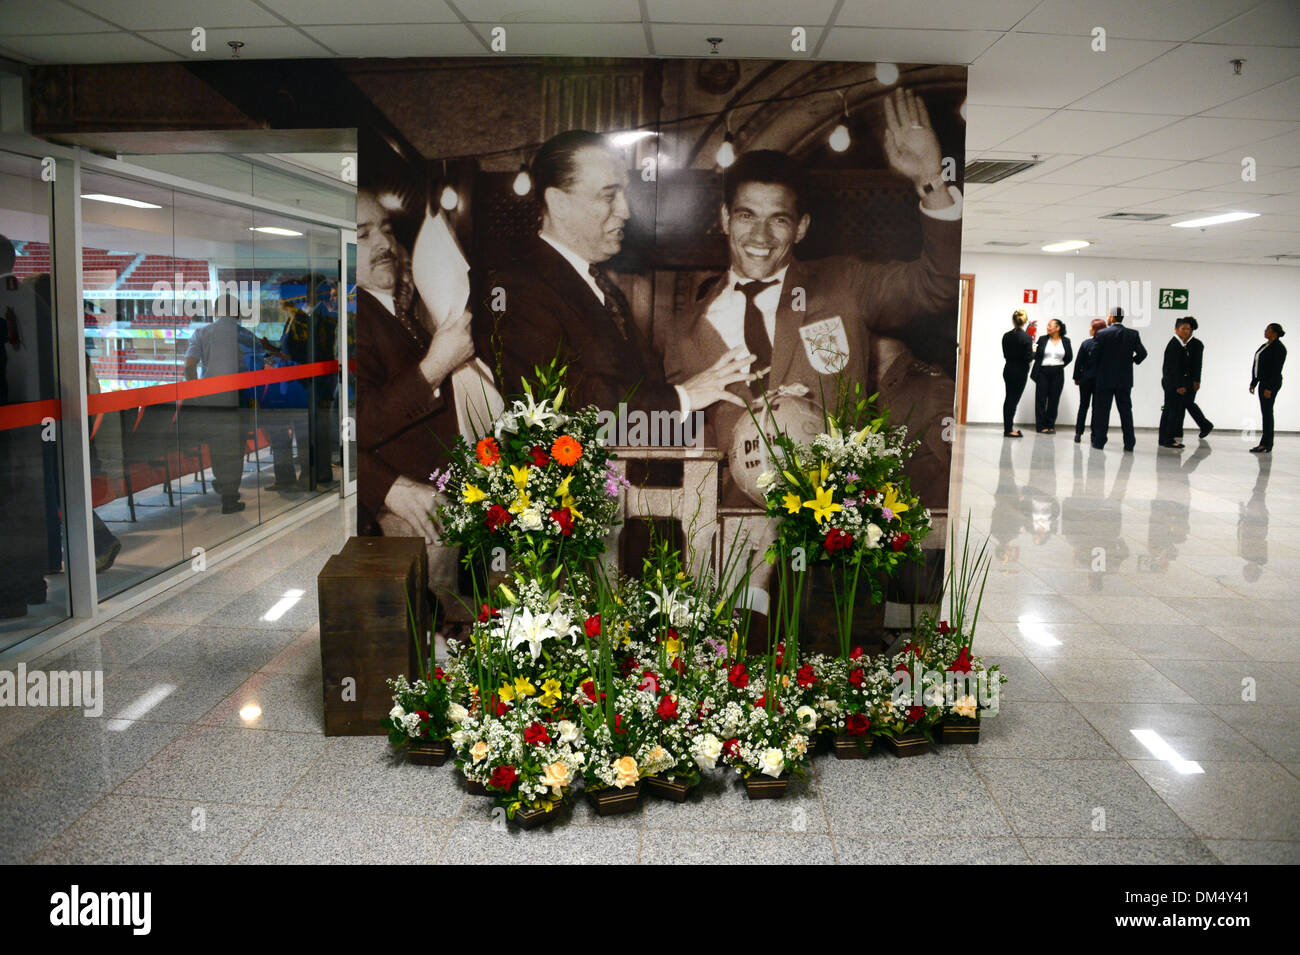 Flowers lie in front of a large photograph of late Brazilian national soccer player and two-times world champion Mane Garrincha (R) in the lobby area of the 'Stadion Nacional Mane Garrincha' stadium in Brasilia, Brazil, 9 December 2013. The Stadion Nacional Mane Garrincha is one of the venues which will host the matches for the 2014 Soccer World Cup in Brazil. Photo: Marcus Brandt/dpa Stock Photo